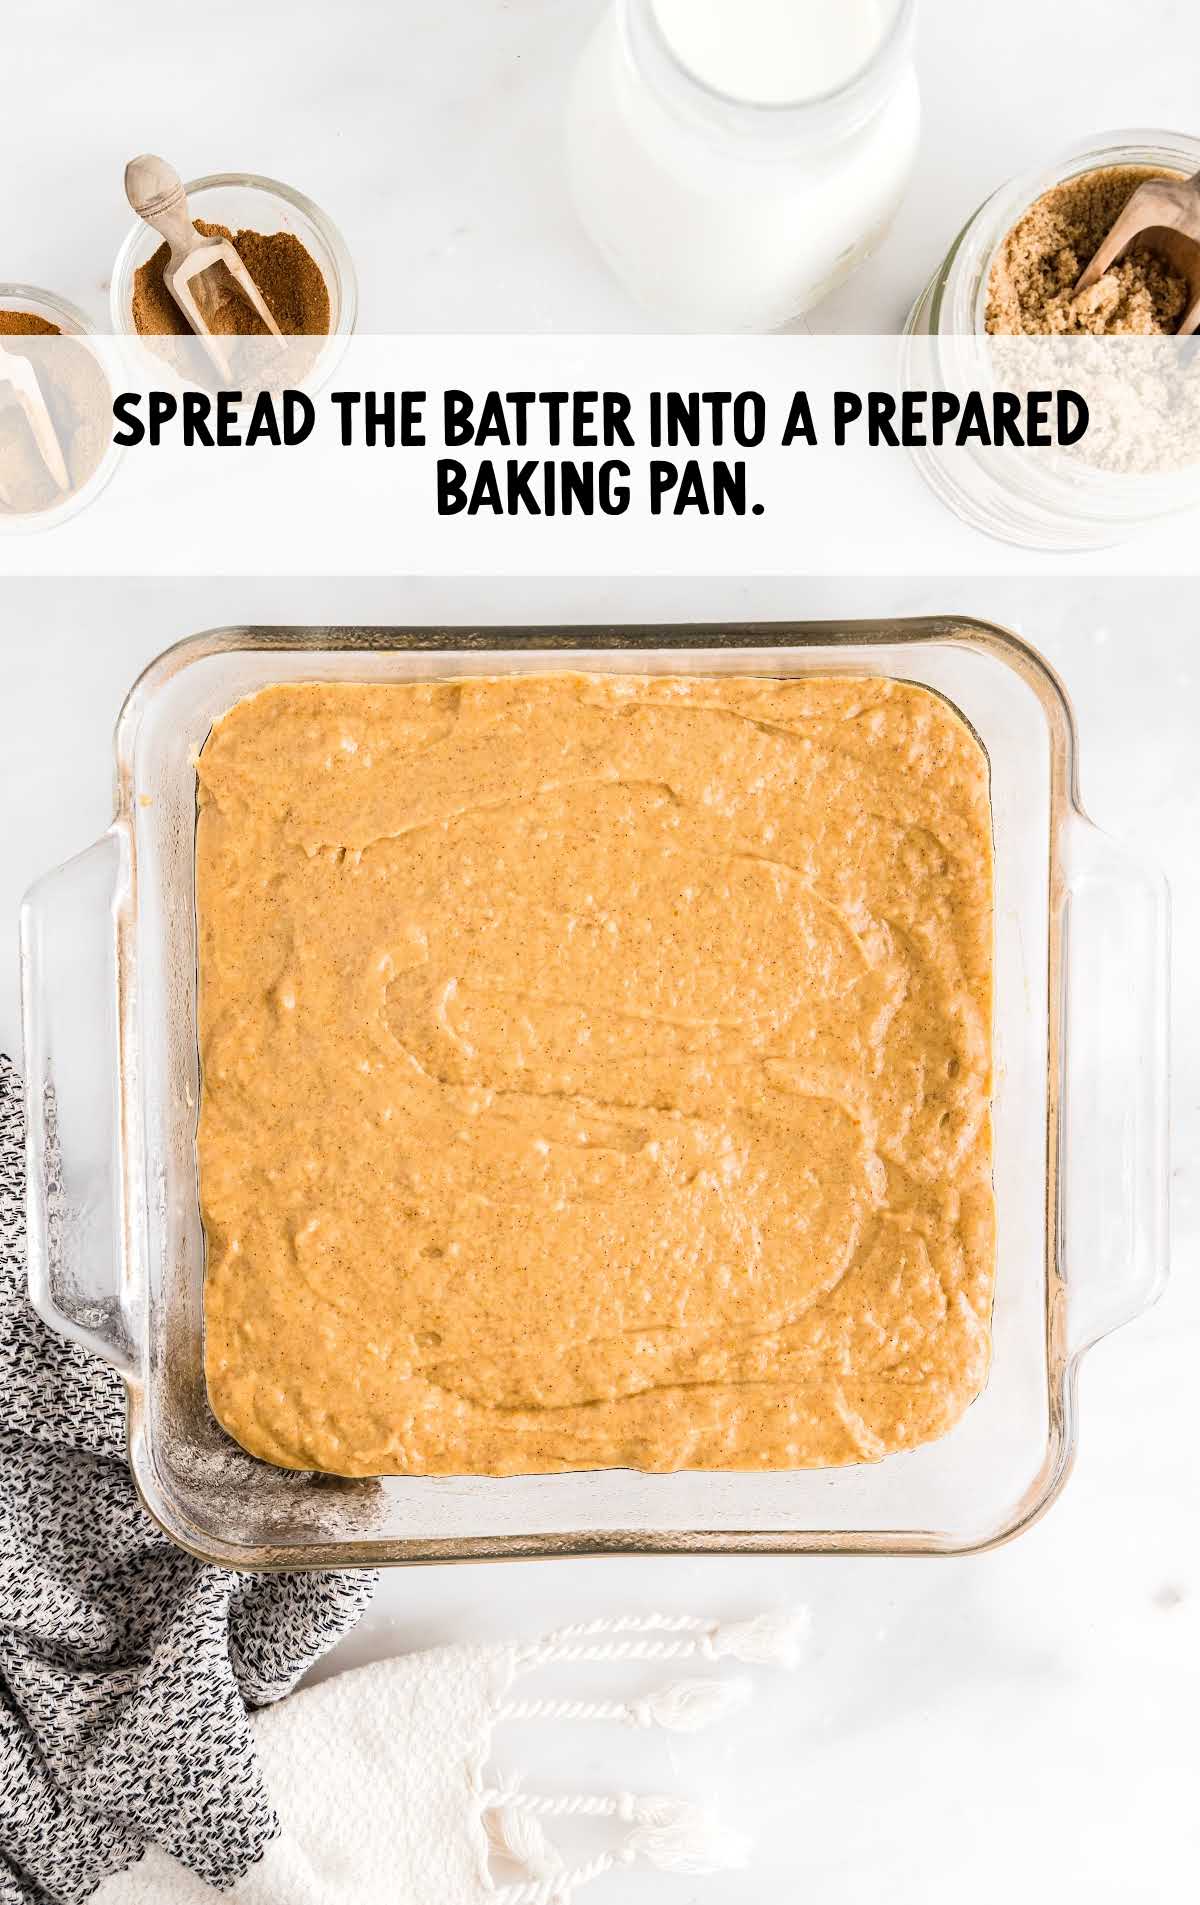 batter spread into a baking pan